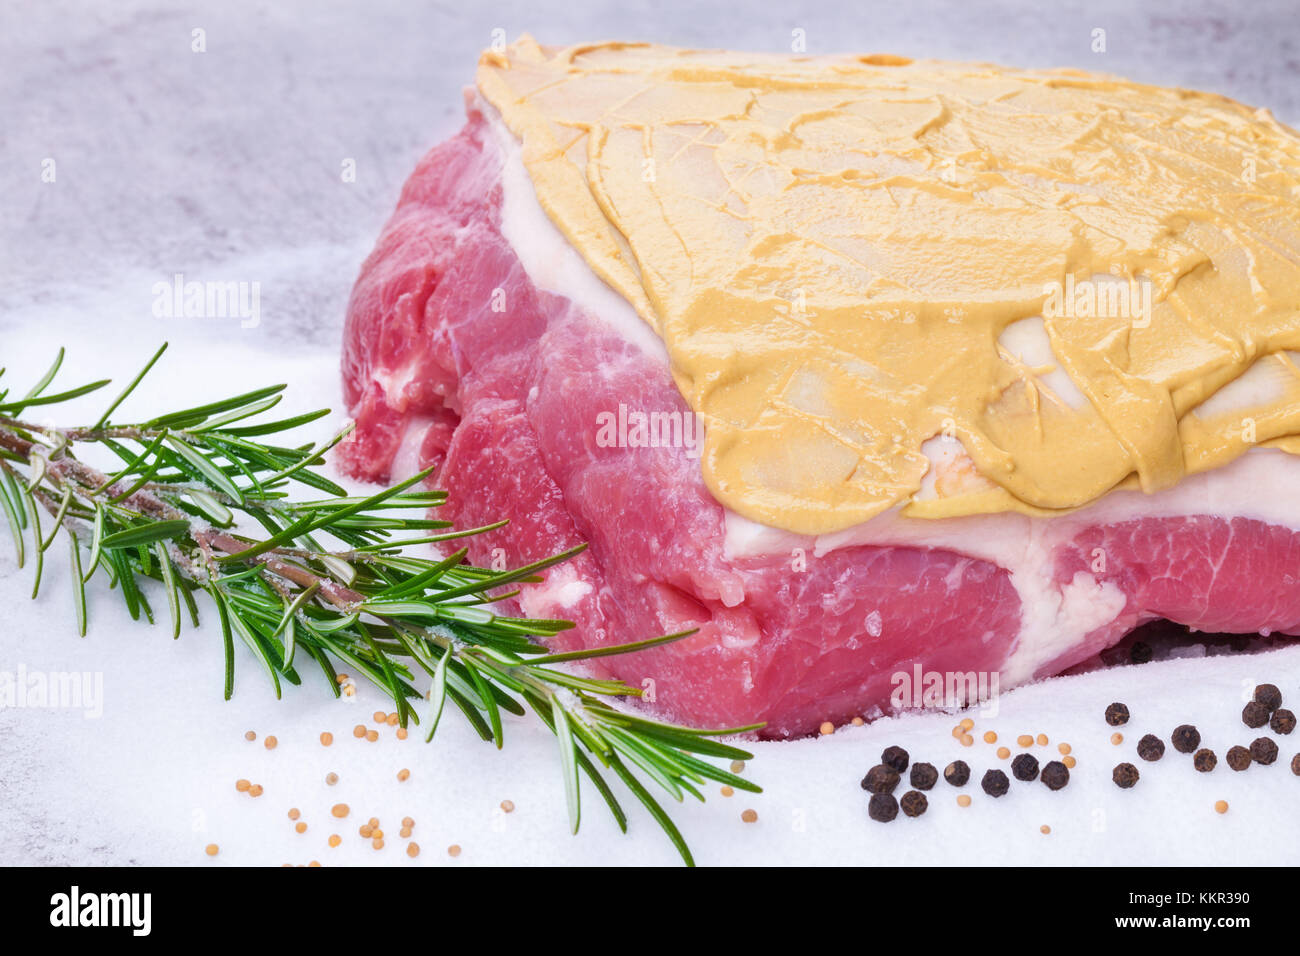 Roast with crackling, coated with mustard, preparation Stock Photo